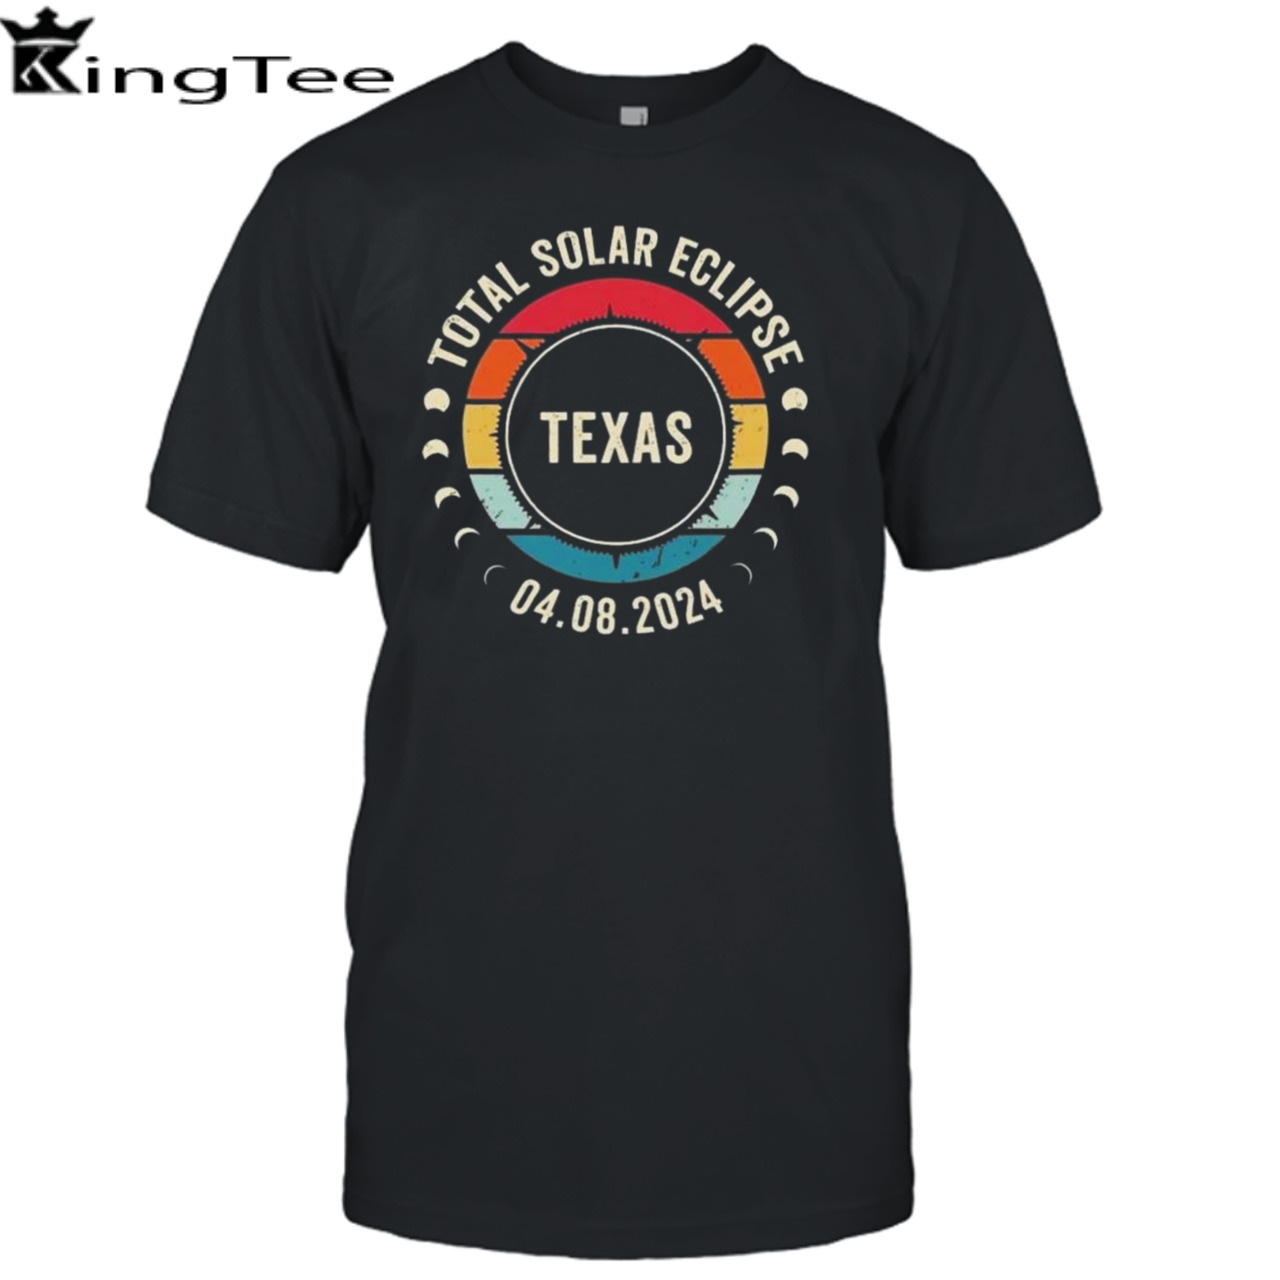 Total Solar Eclipse 2024 Texas Sun Moon Totality 4.8.2024 Great American VIntage Shirt